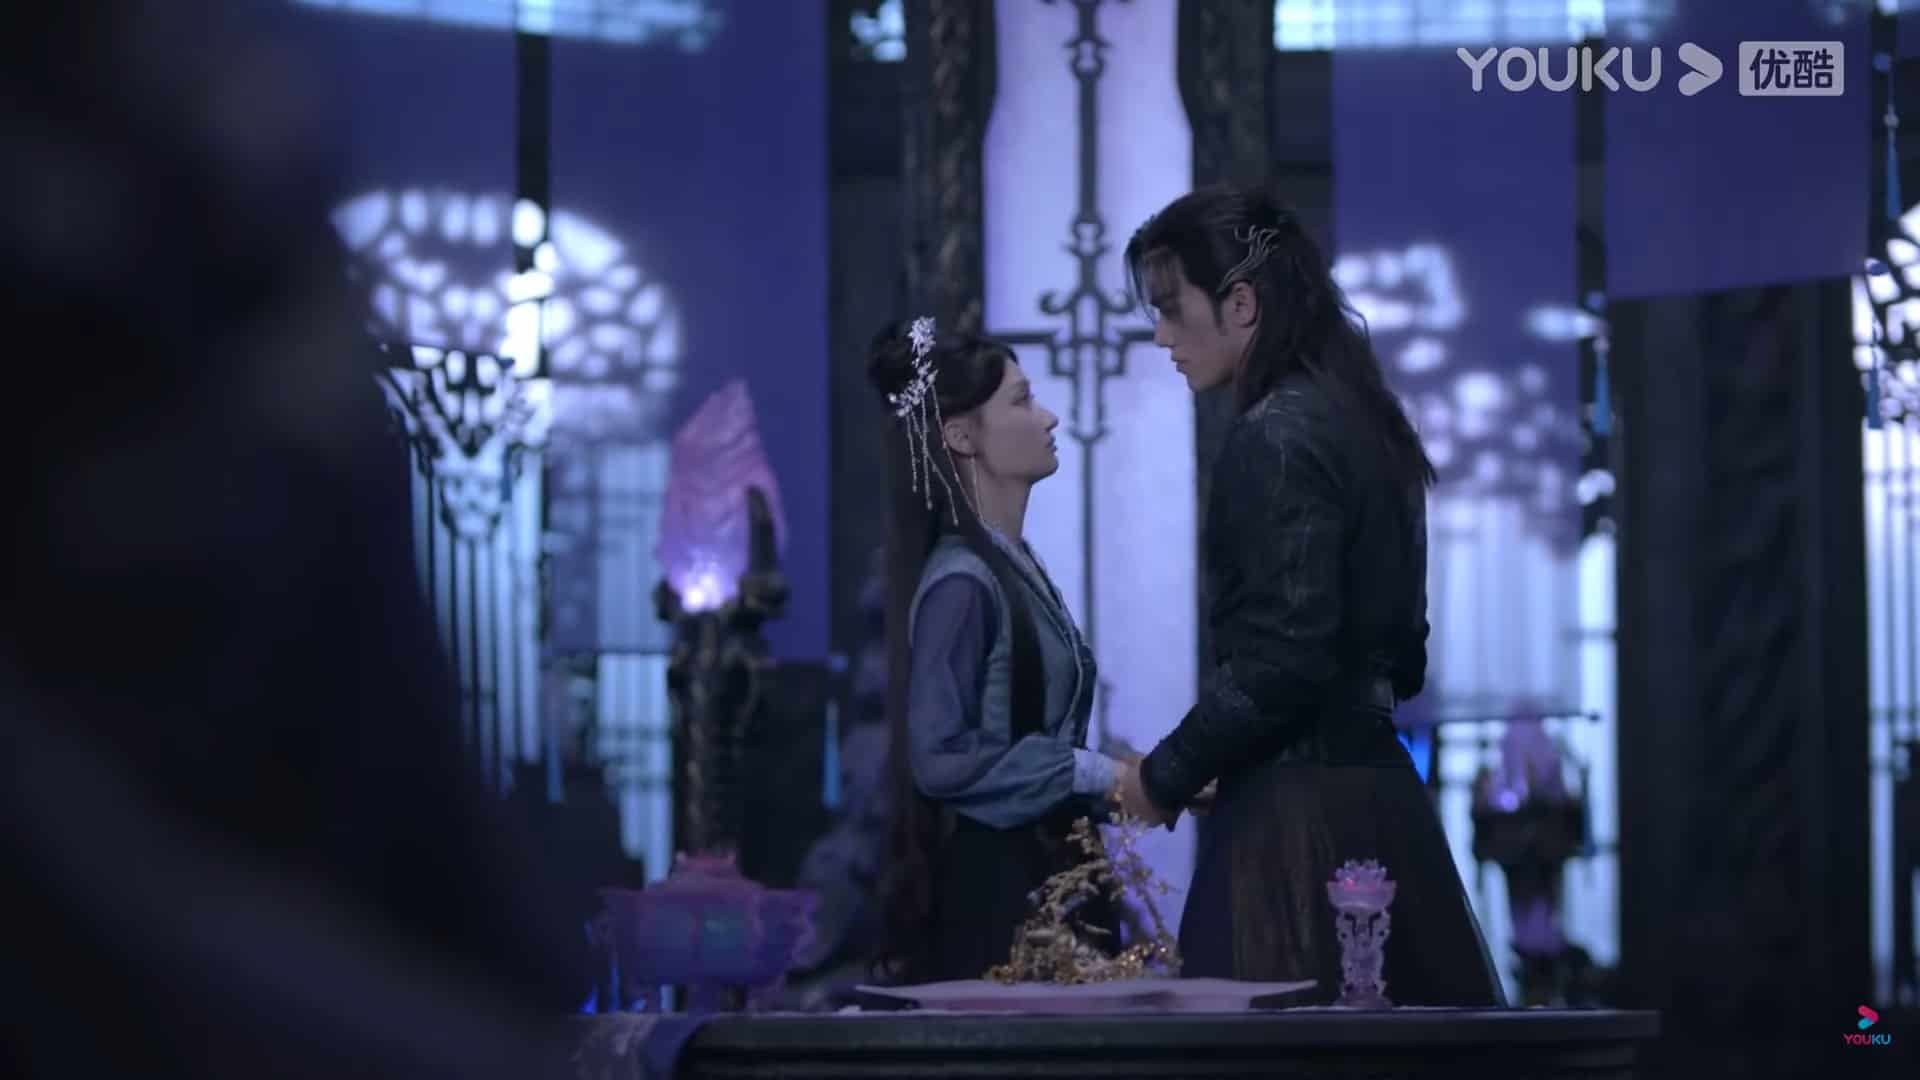 The Starry Love: Qing Kui and Chao Feng